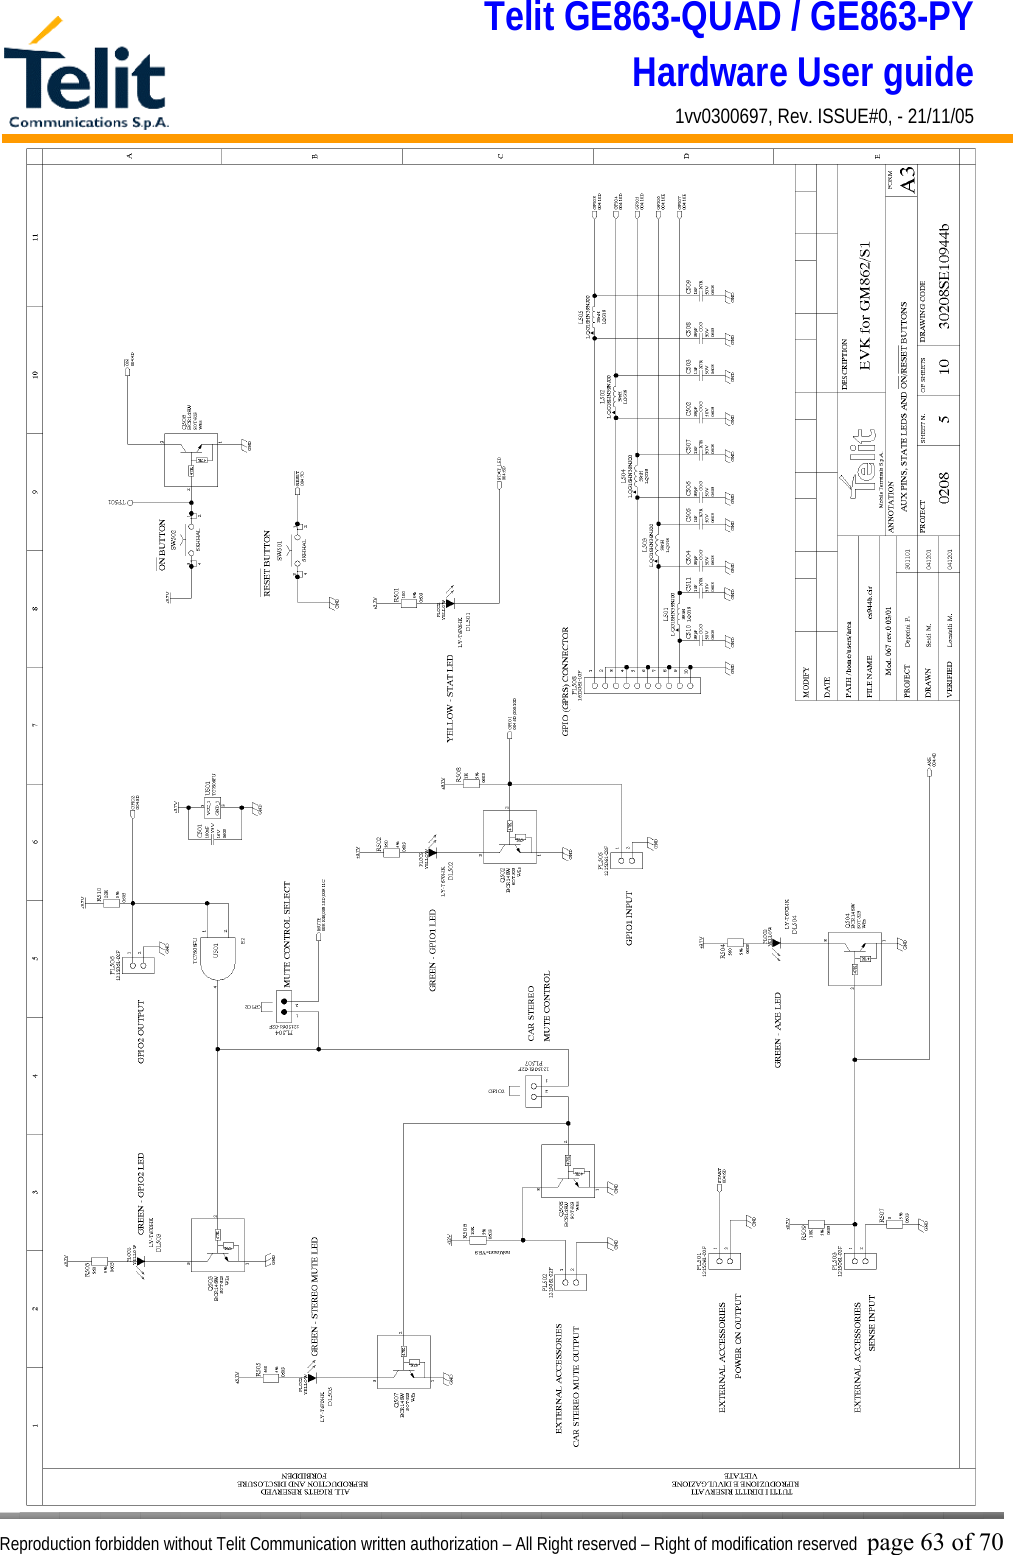 Telit GE863-QUAD / GE863-PY Hardware User guide 1vv0300697, Rev. ISSUE#0, - 21/11/05    Reproduction forbidden without Telit Communication written authorization – All Right reserved – Right of modification reserved page 63 of 70 